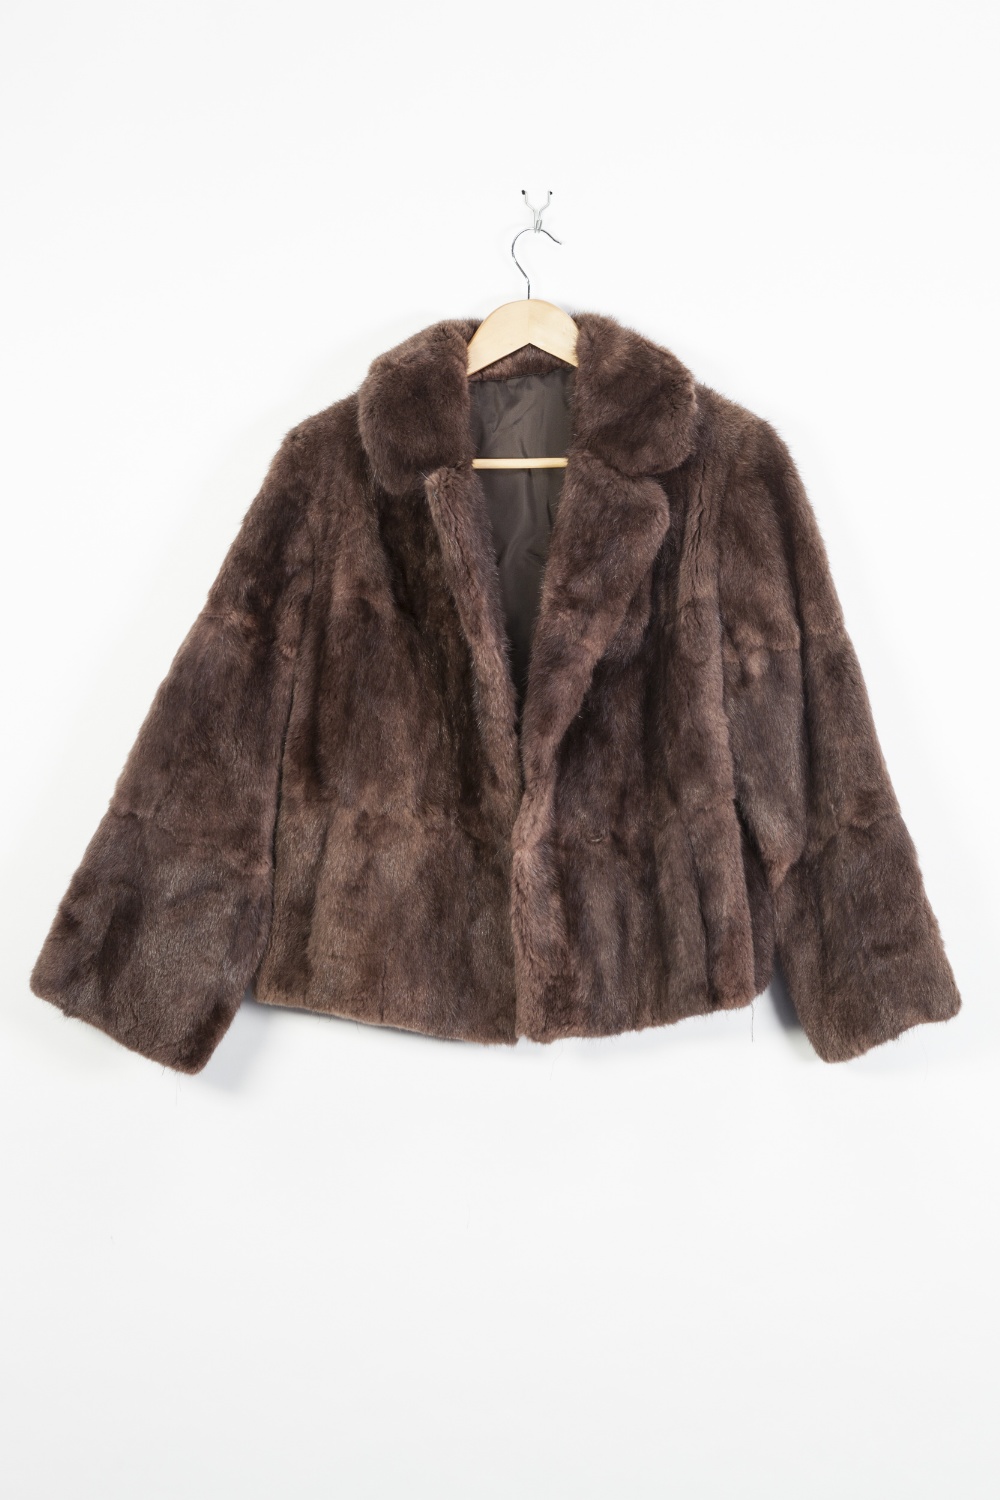 LADIES NATURAL MINK SHORT CAPE, cut with two vents, ANOTHER SLIGHTLY DARKER AND A LADIES SHORT FUR